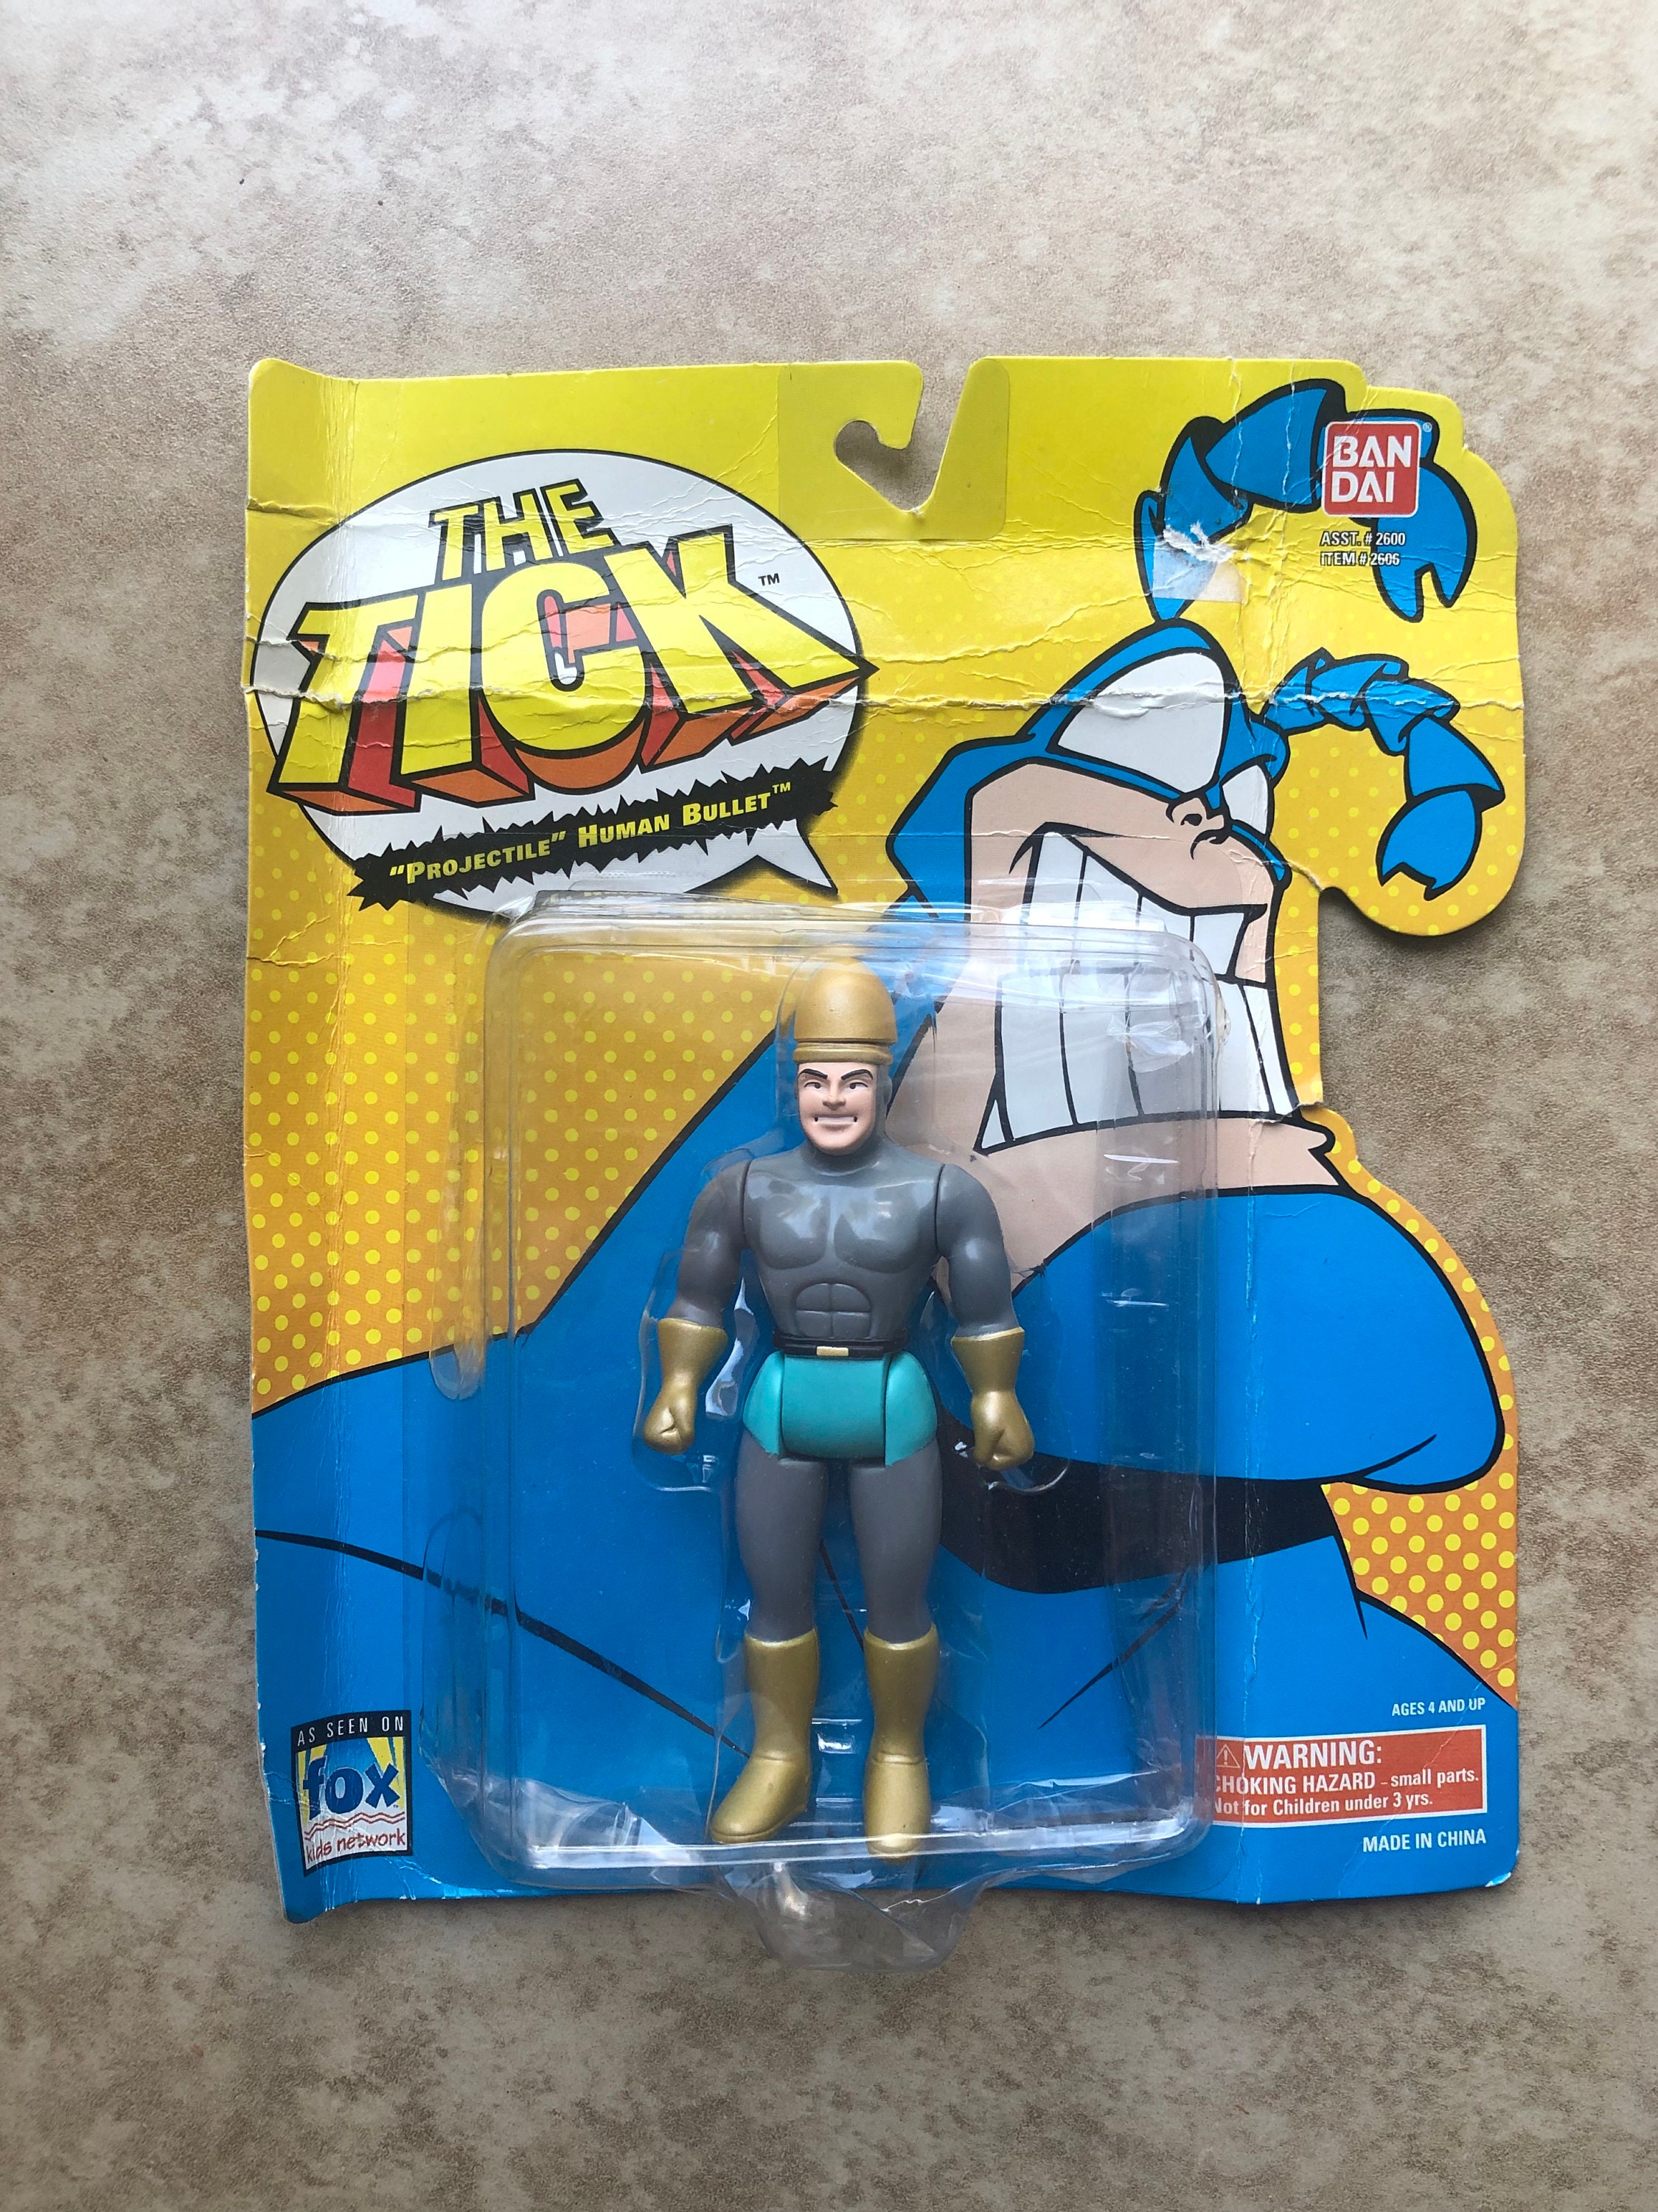 The Tick Projectile Human Bullet 6in Action Figure Bandai 1994 for sale online